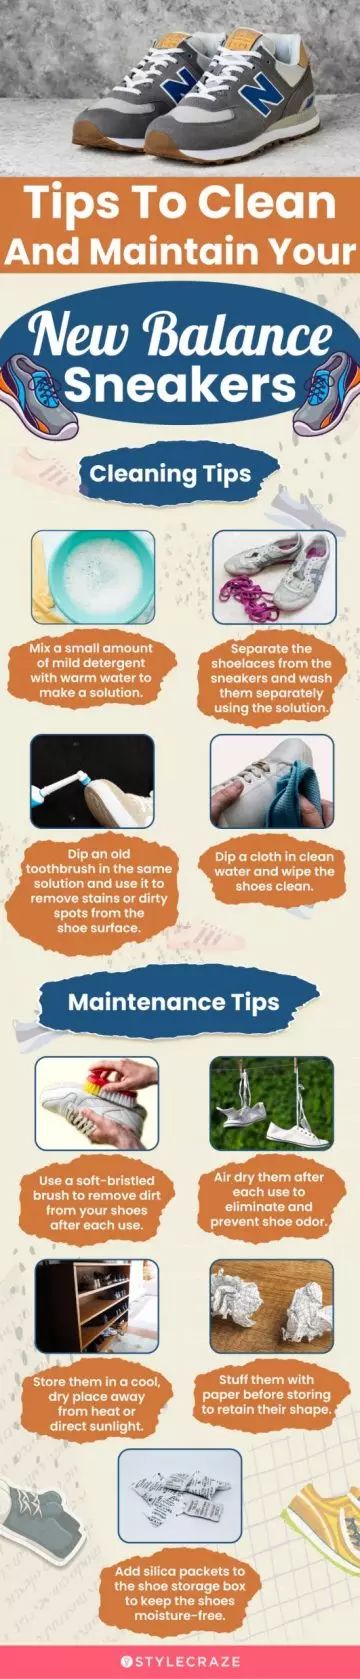 Tips To Clean And Maintain Your New Balance Sneakers (infographic)